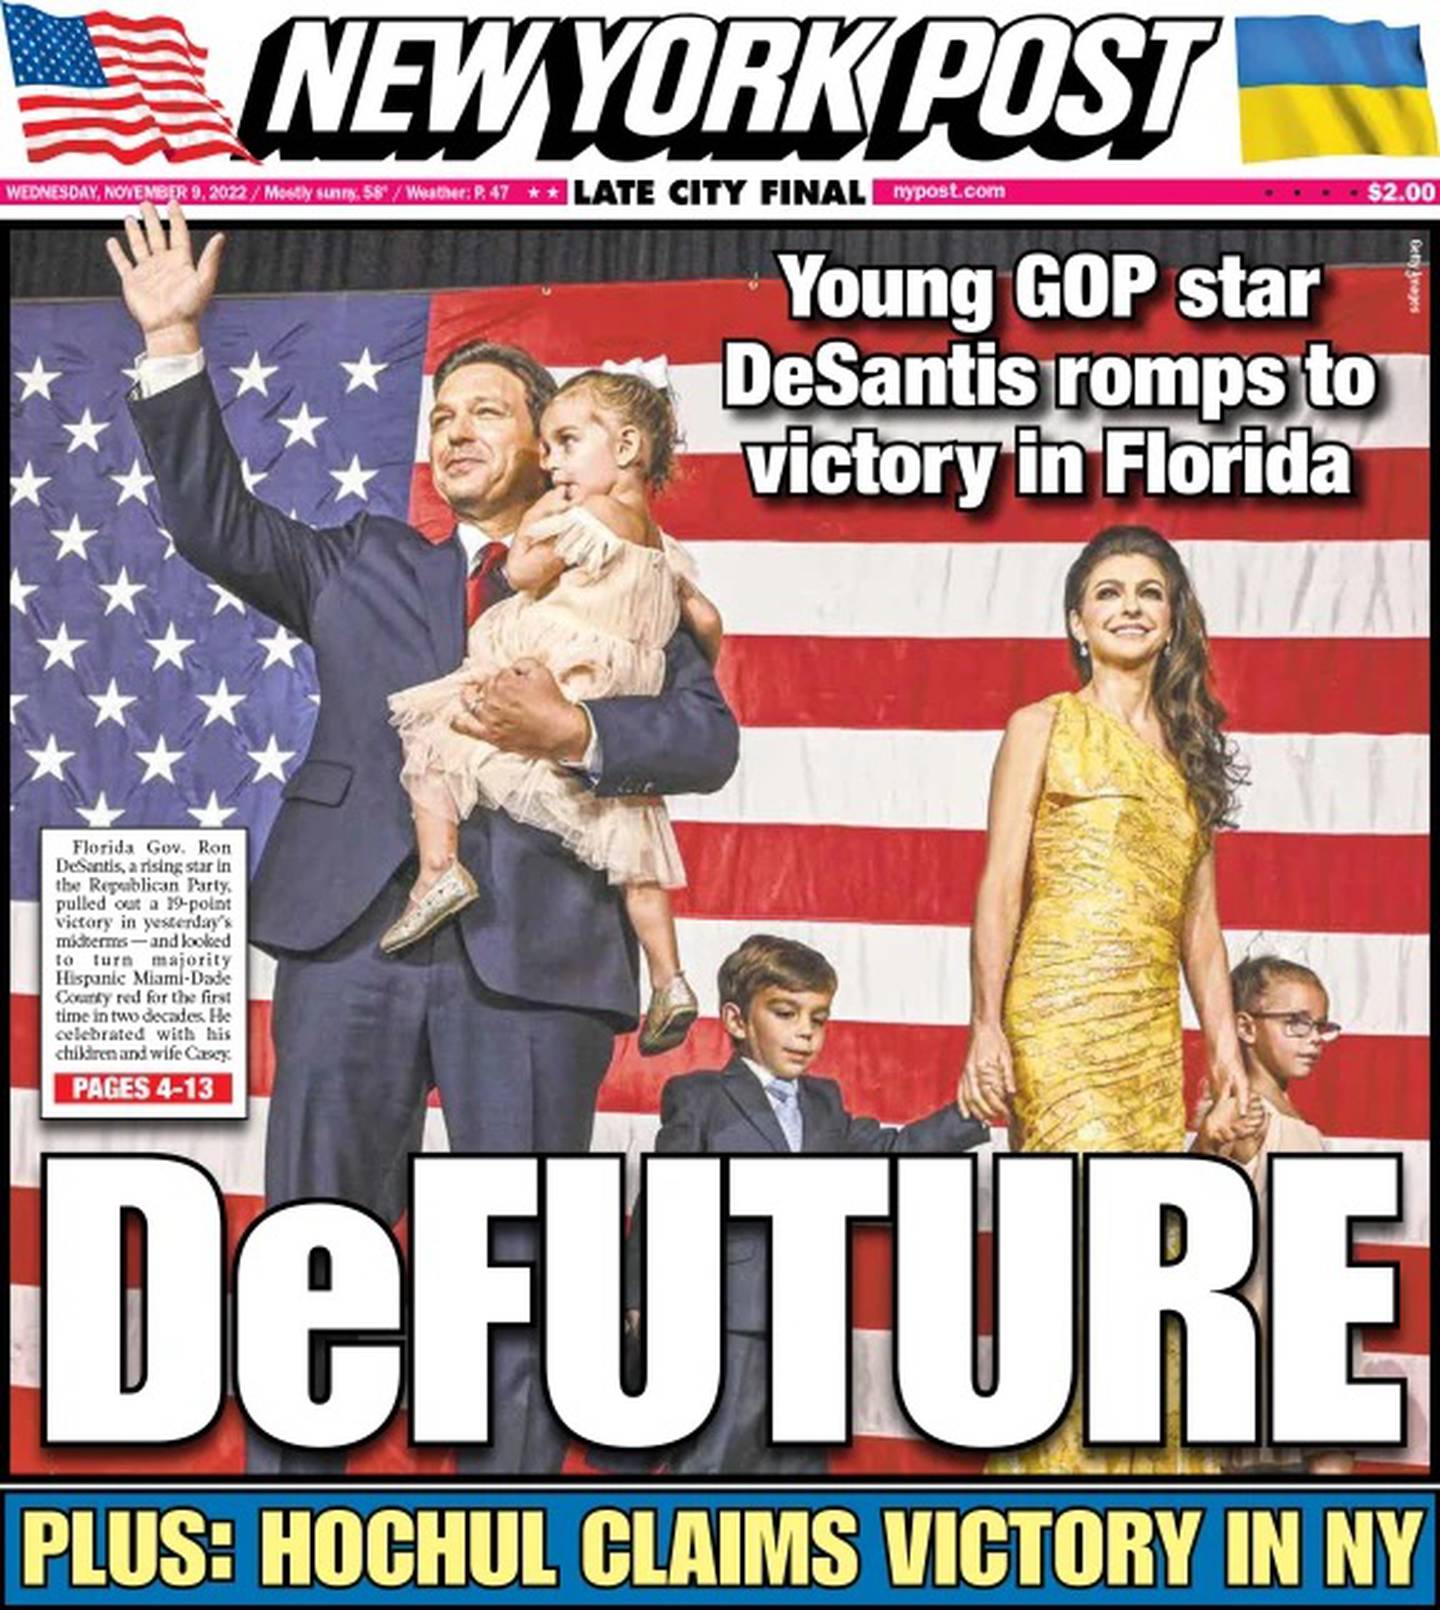 New York Post front page heralds Ron DeSantis re-election as Florida governor